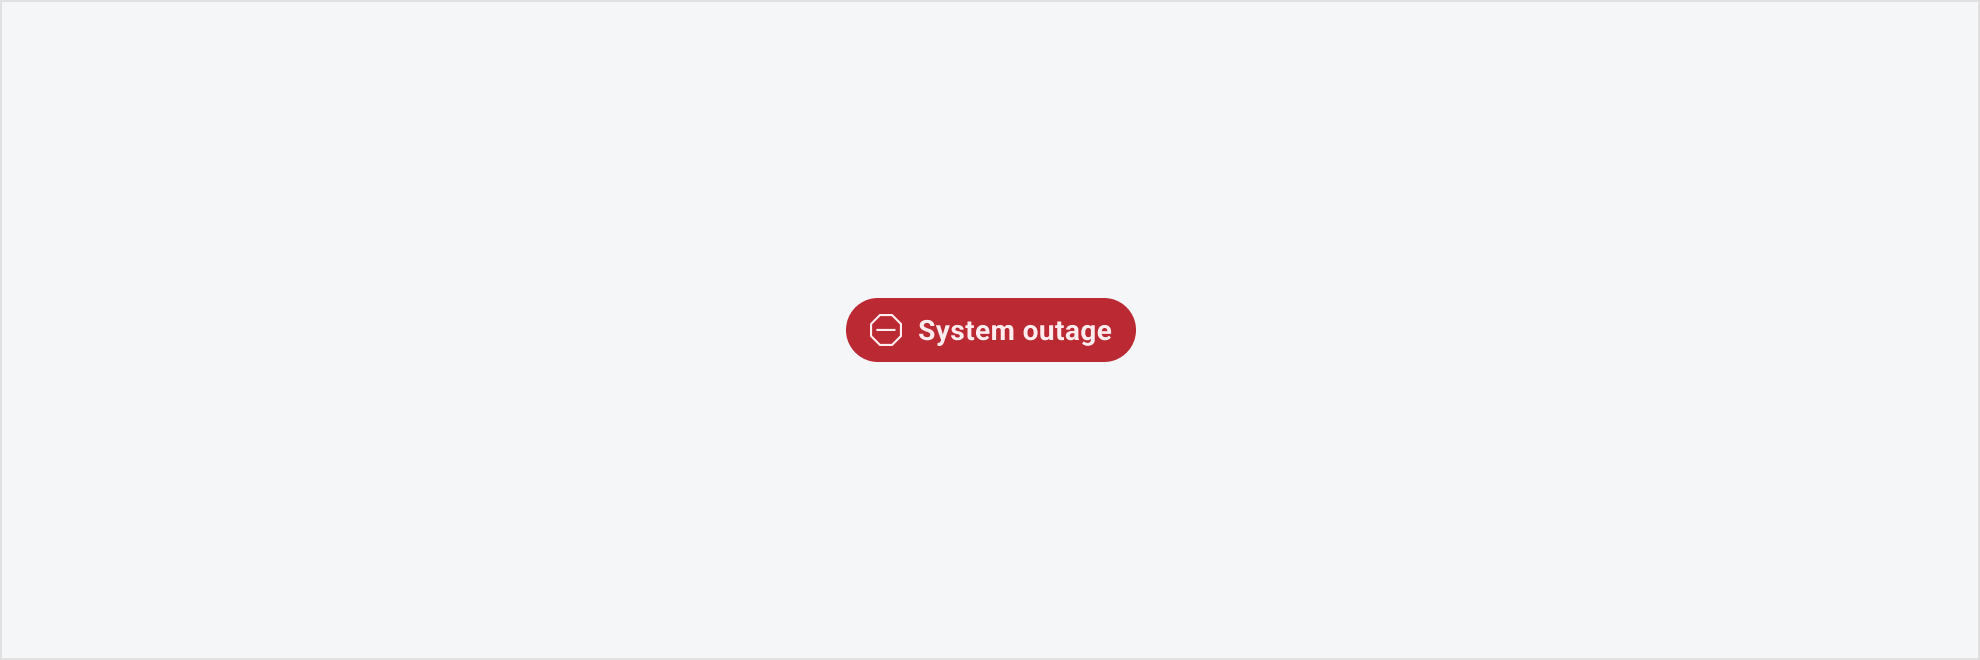 Badge with alert-error icon and label, "System outage".